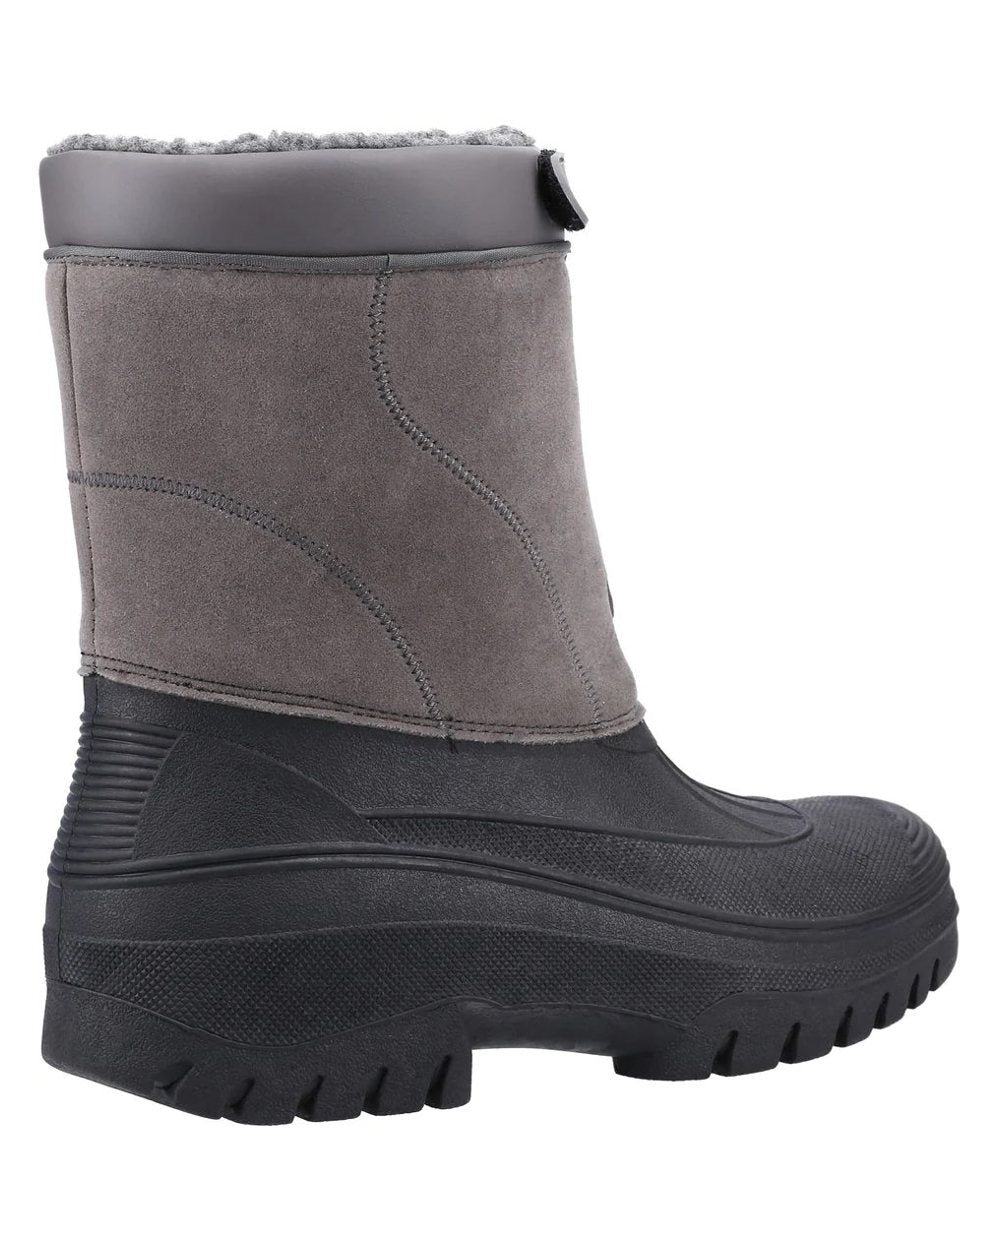 Grey coloured Cotswold Mens Venture Waterproof Winter Boots on white background 